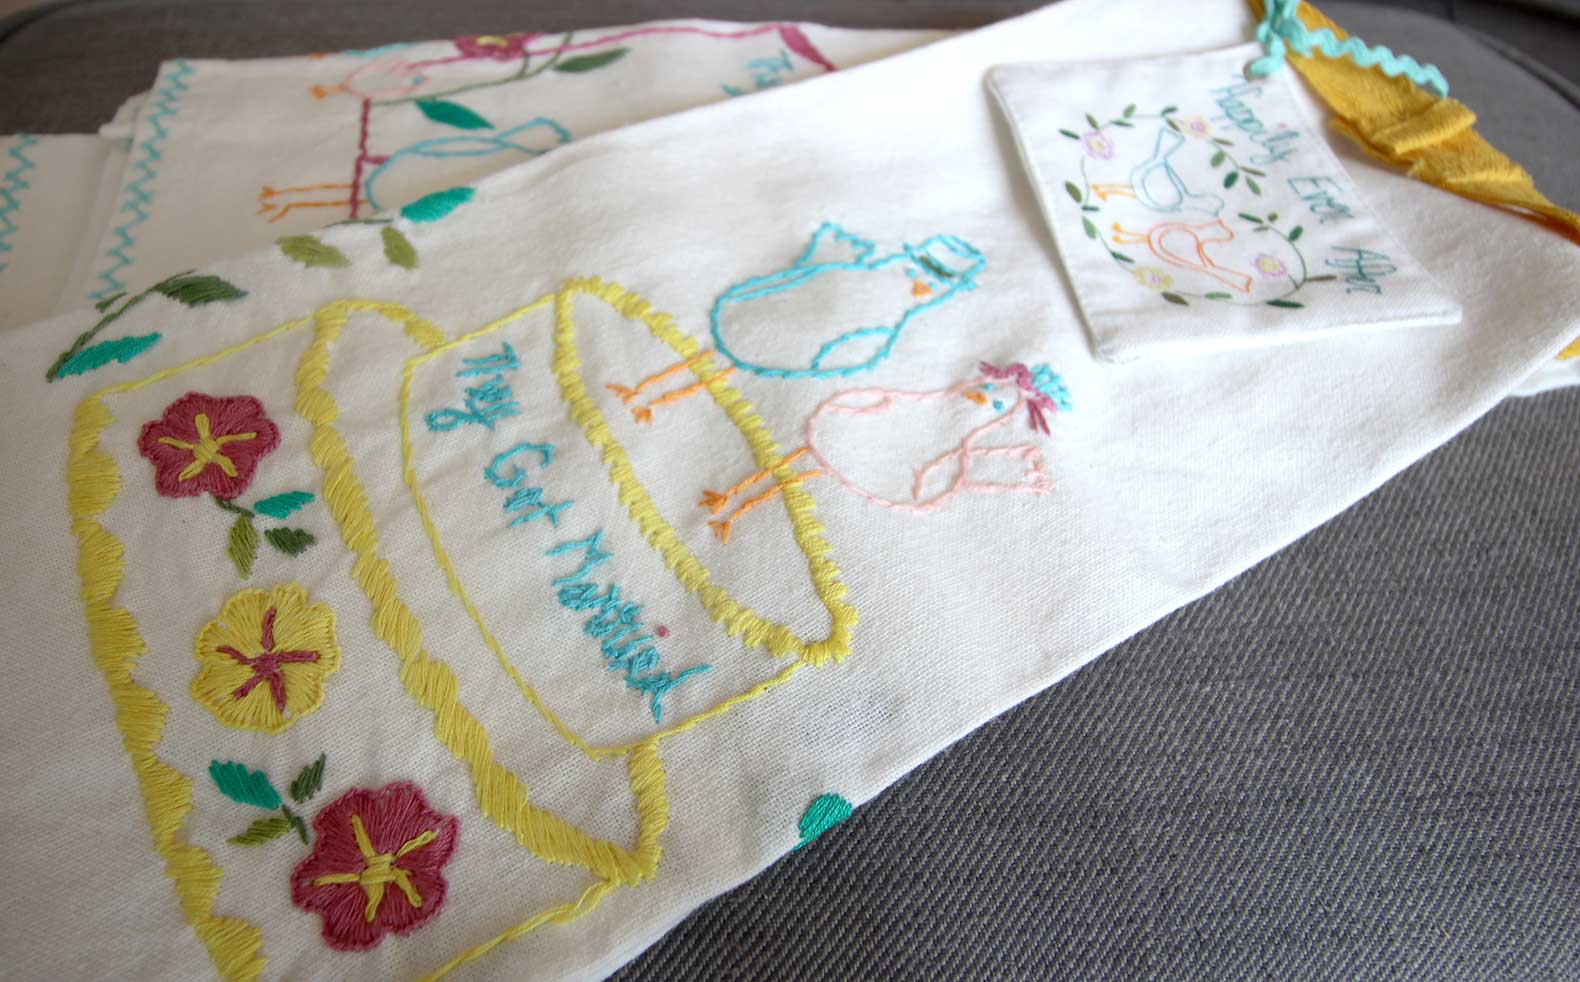 DIY Placemats with Colorful Embroidery